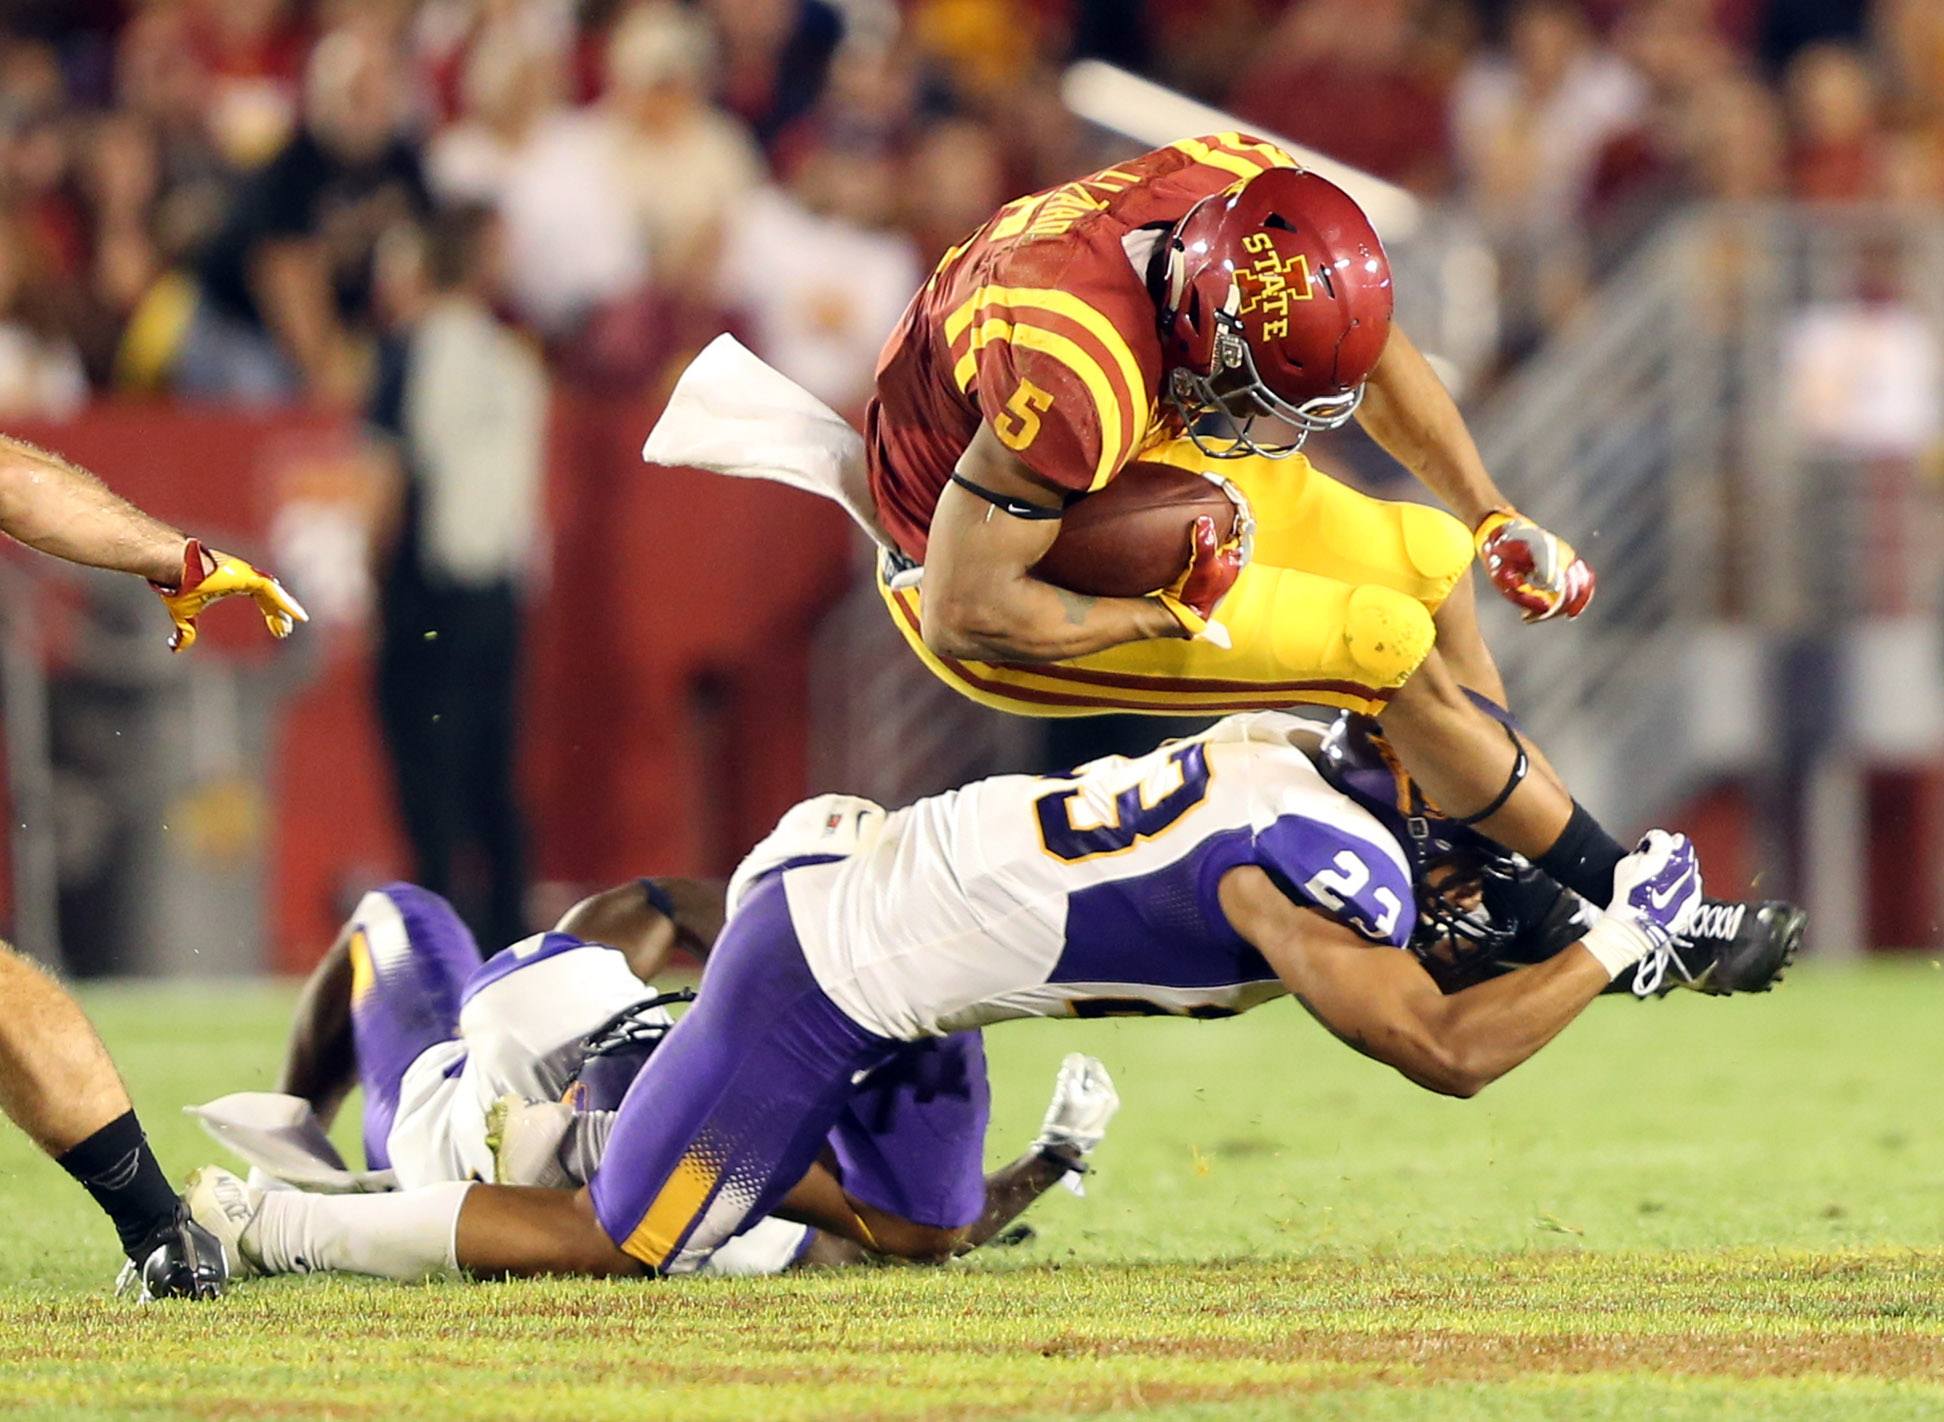 Sep 3, 2016; Ames, IA, USA; Northern Iowa Panthers linebacker A.J. Allen (23) tackles Iowa State Cyclones wide receiver Allen Lazard (5) at Jack Trice Stadium. The Panthers beat the Cyclones 25-20. Mandatory Credit: Reese Strickland-USA TODAY Sports